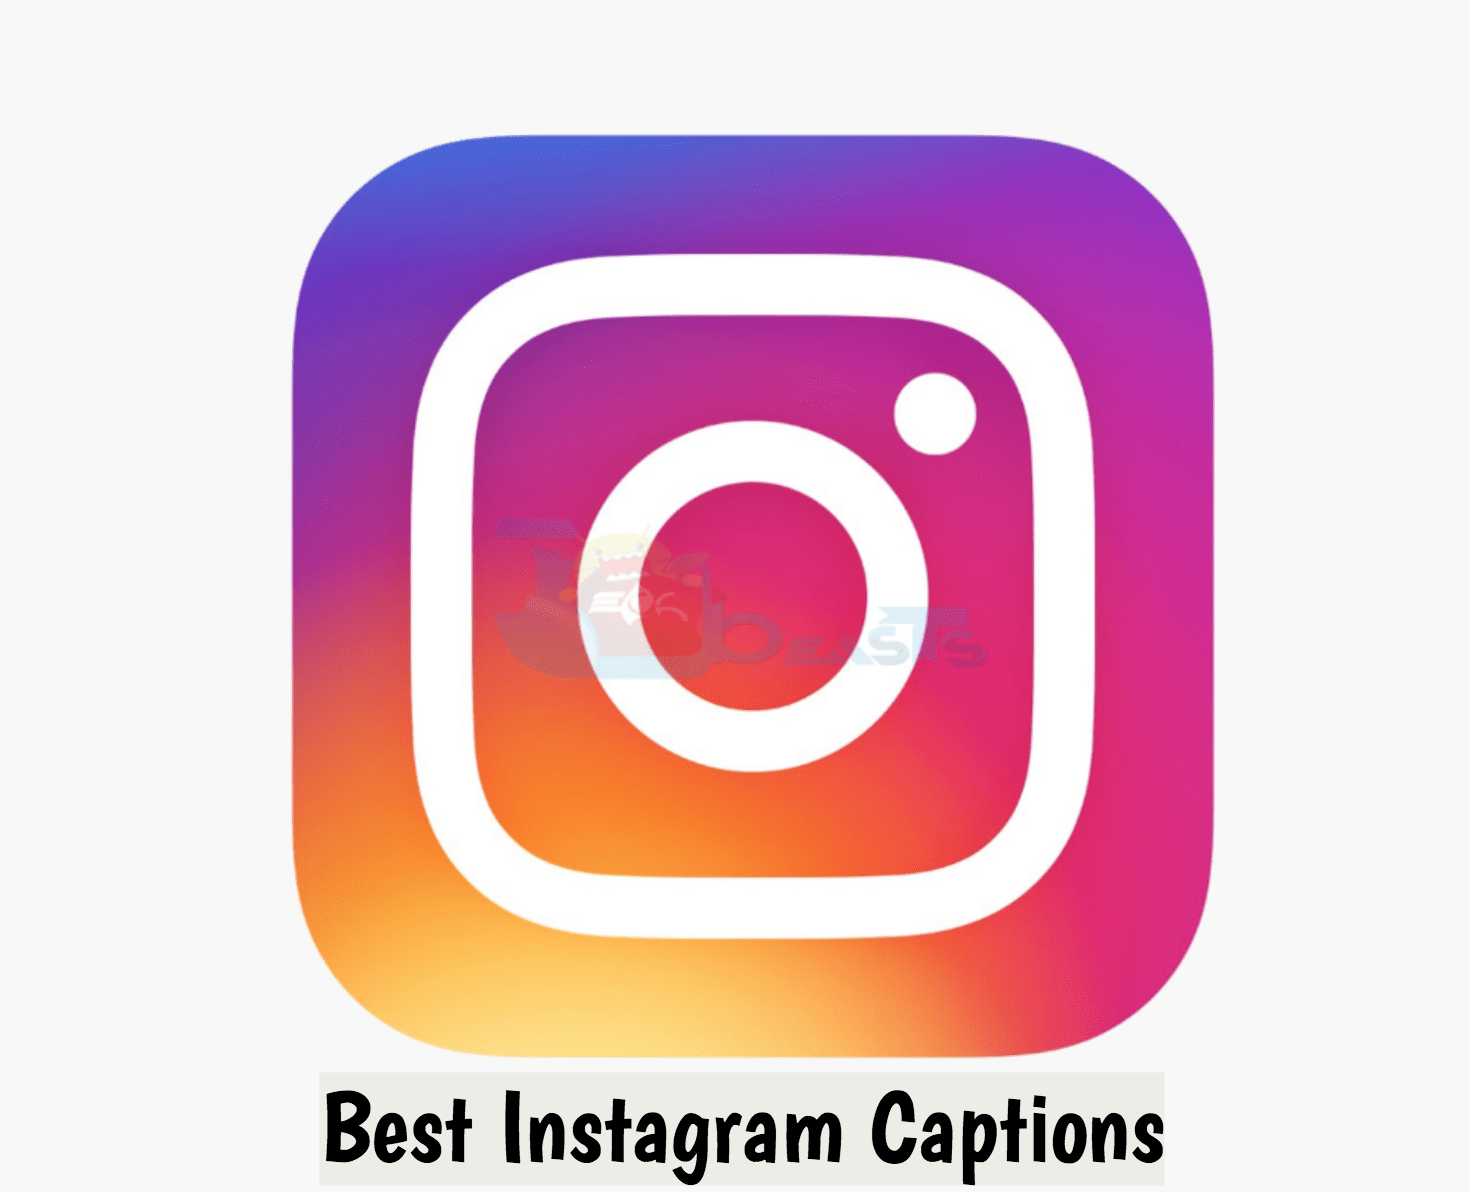 Best Instagram Captions List 2018 For Friends Selfies Cool Funny